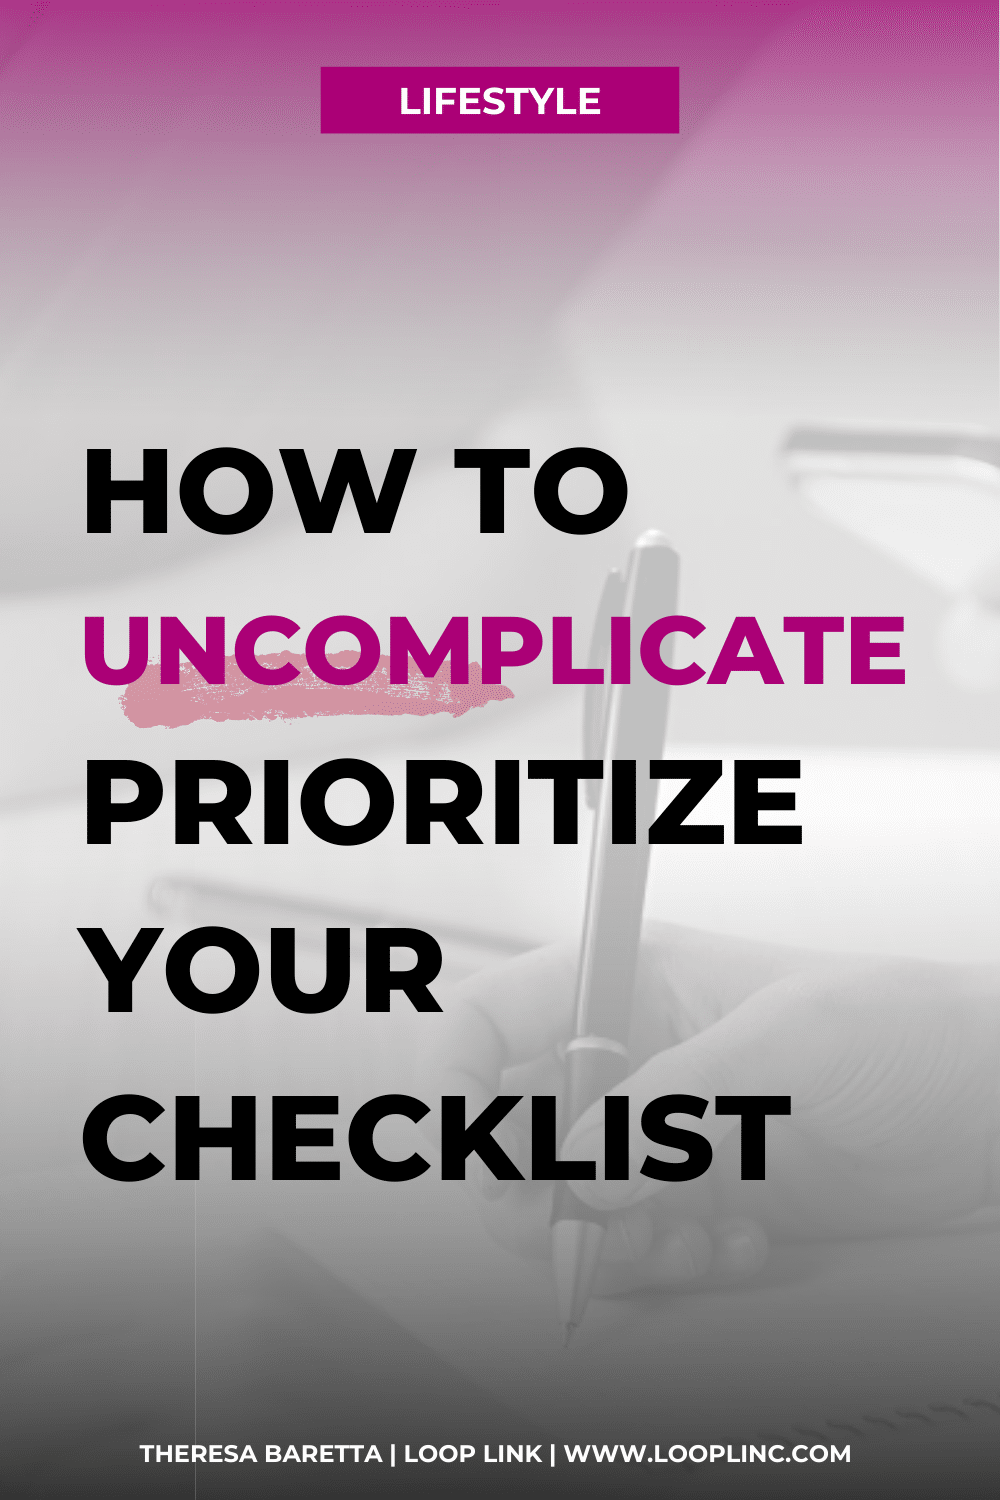 How to Uncomplicate and Prioritize Your Checklist